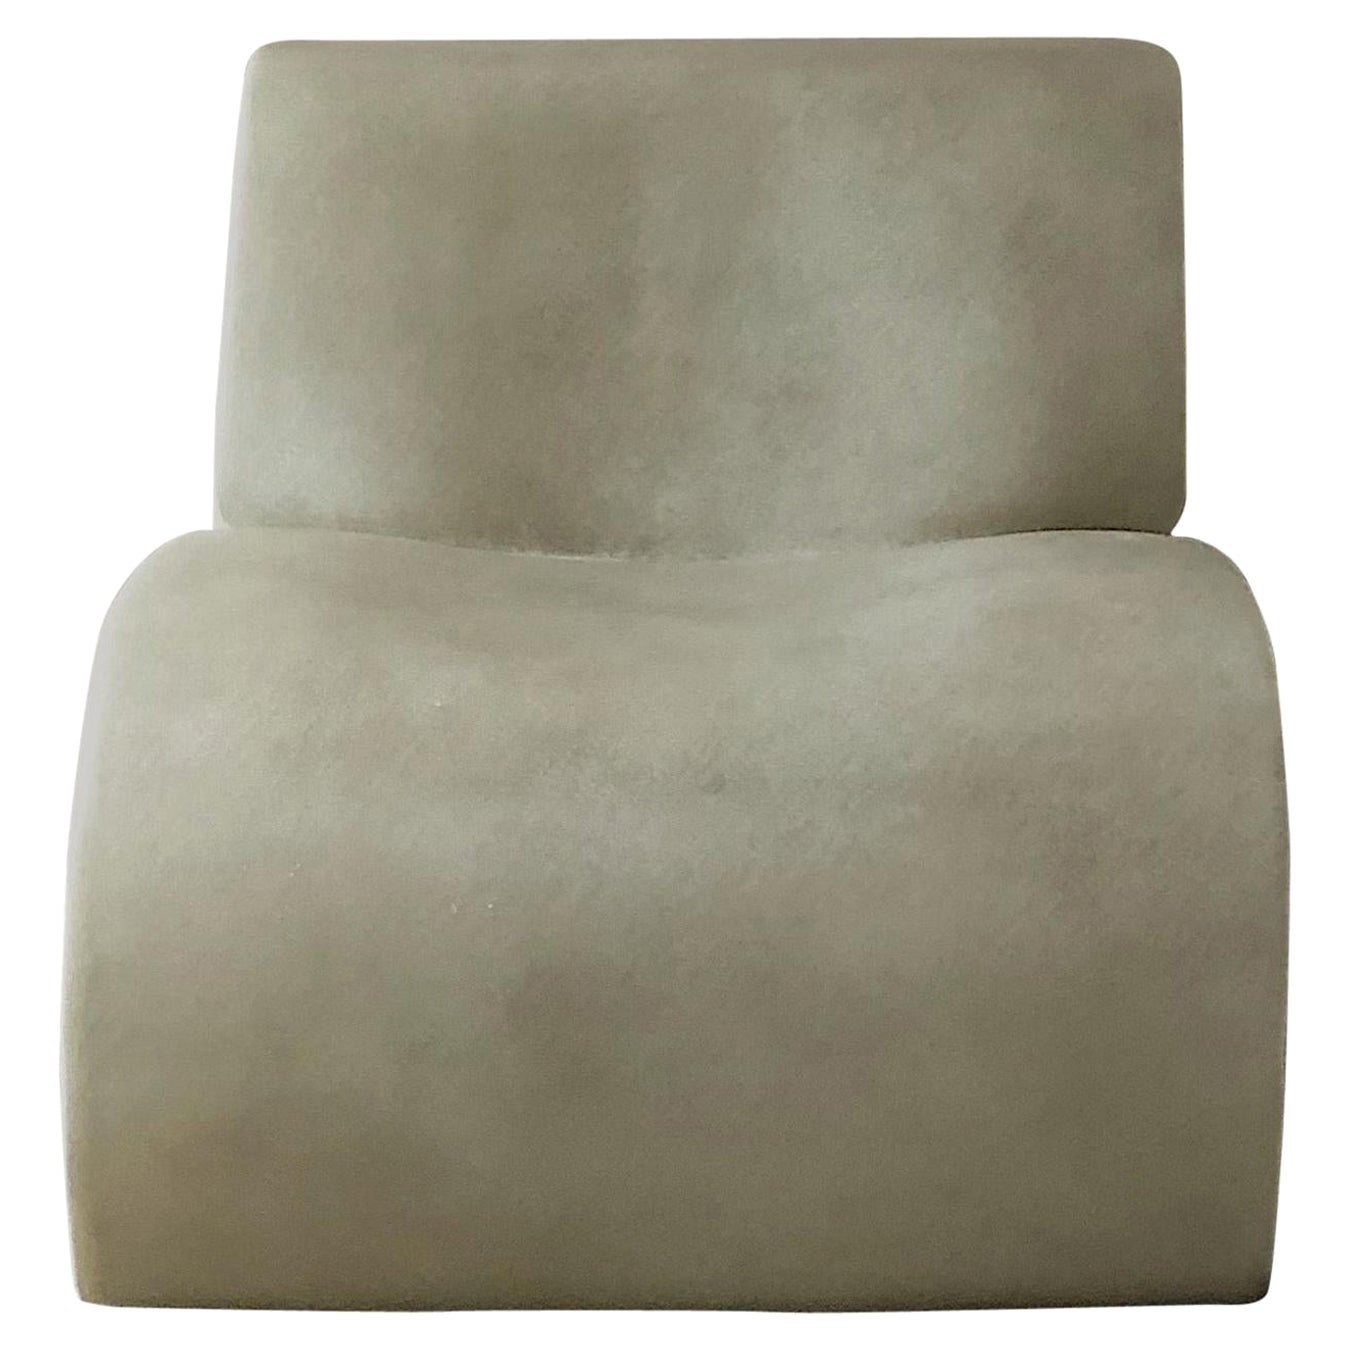 White Curl Up Lounge Chair by kars